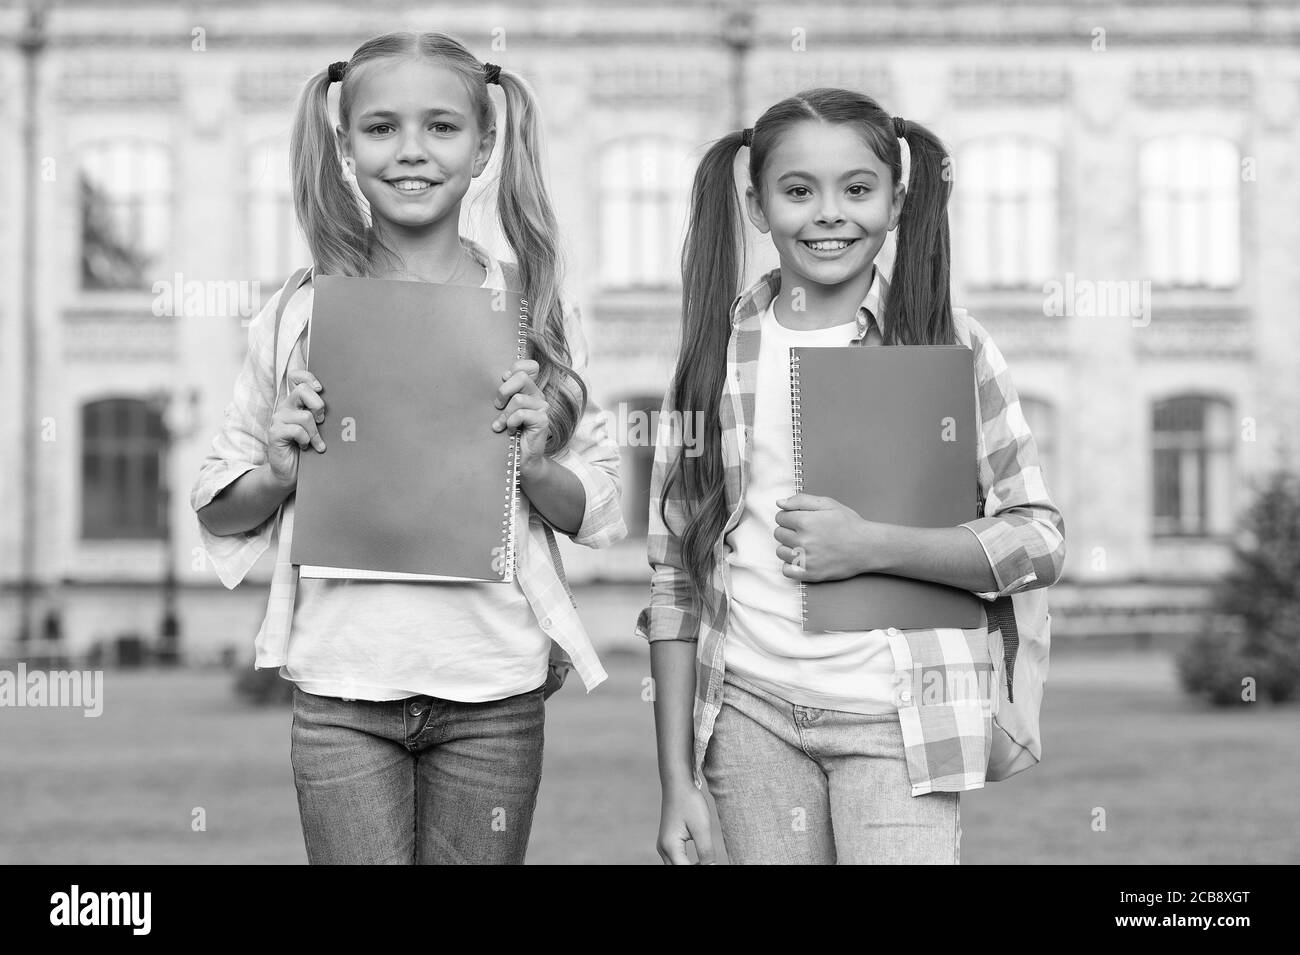 Good friends good books. Happy kids hold books. Adorable bookworms outdoors. School library. Literature and language study. English grammar. Education and knowledge. Keeping heads in books all day. Stock Photo